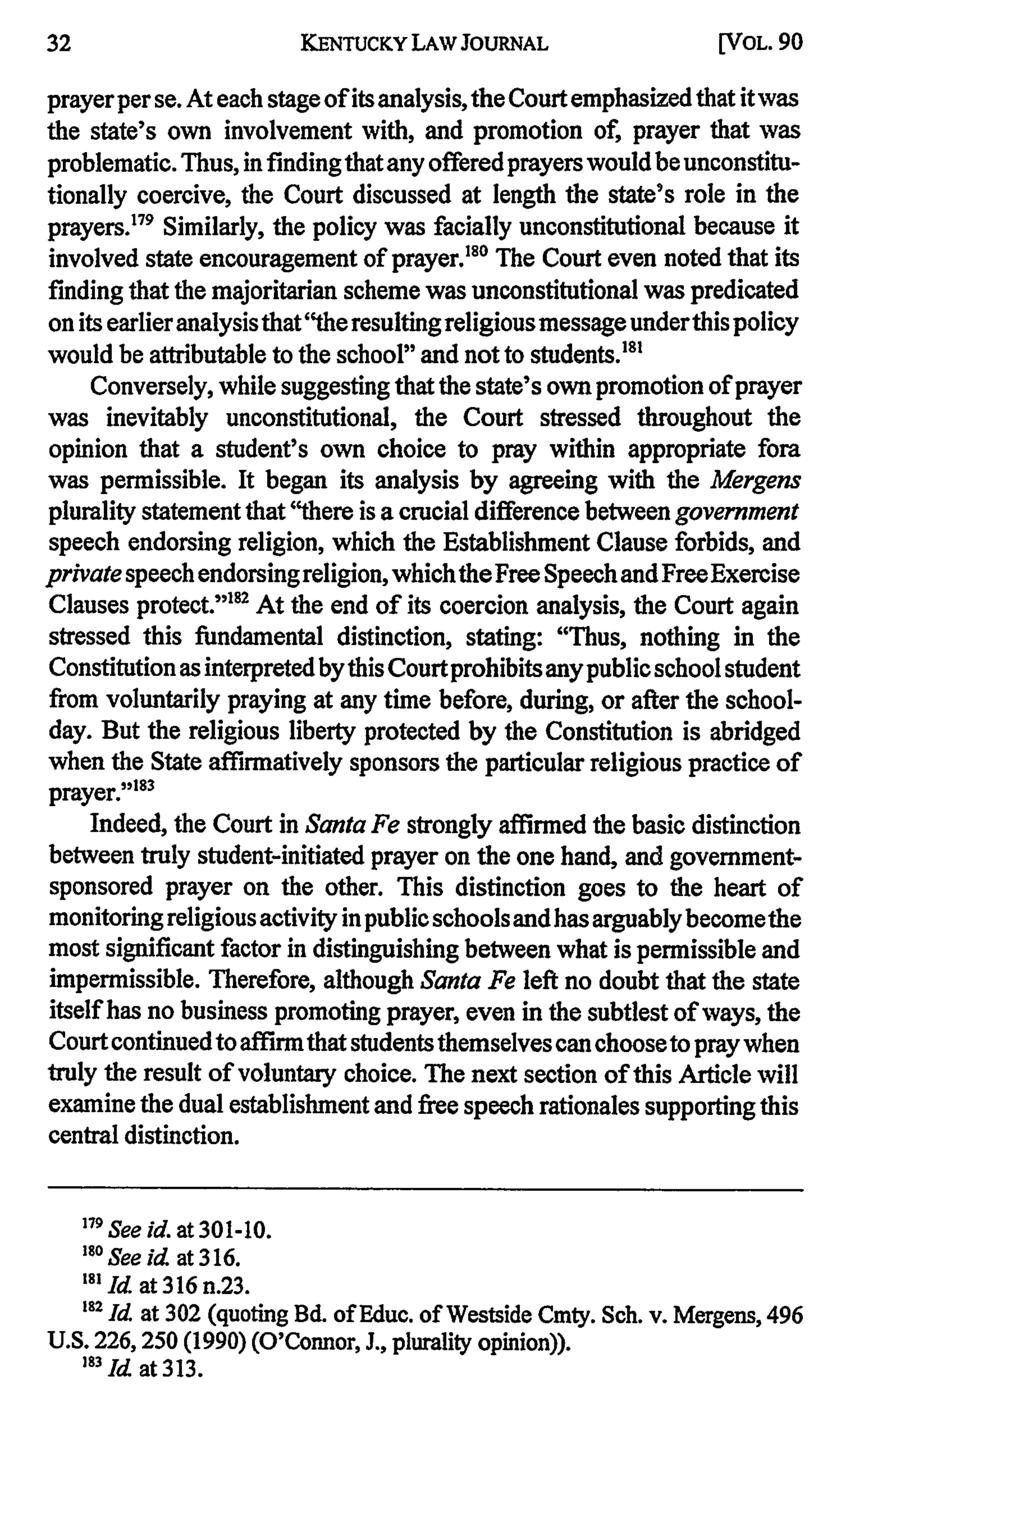 KENTUCKY LAW JOURNAL [VOL. 90 prayer per se. At each stage of its analysis, the Court emphasized that it was the state's own involvement with, and promotion of, prayer that was problematic.